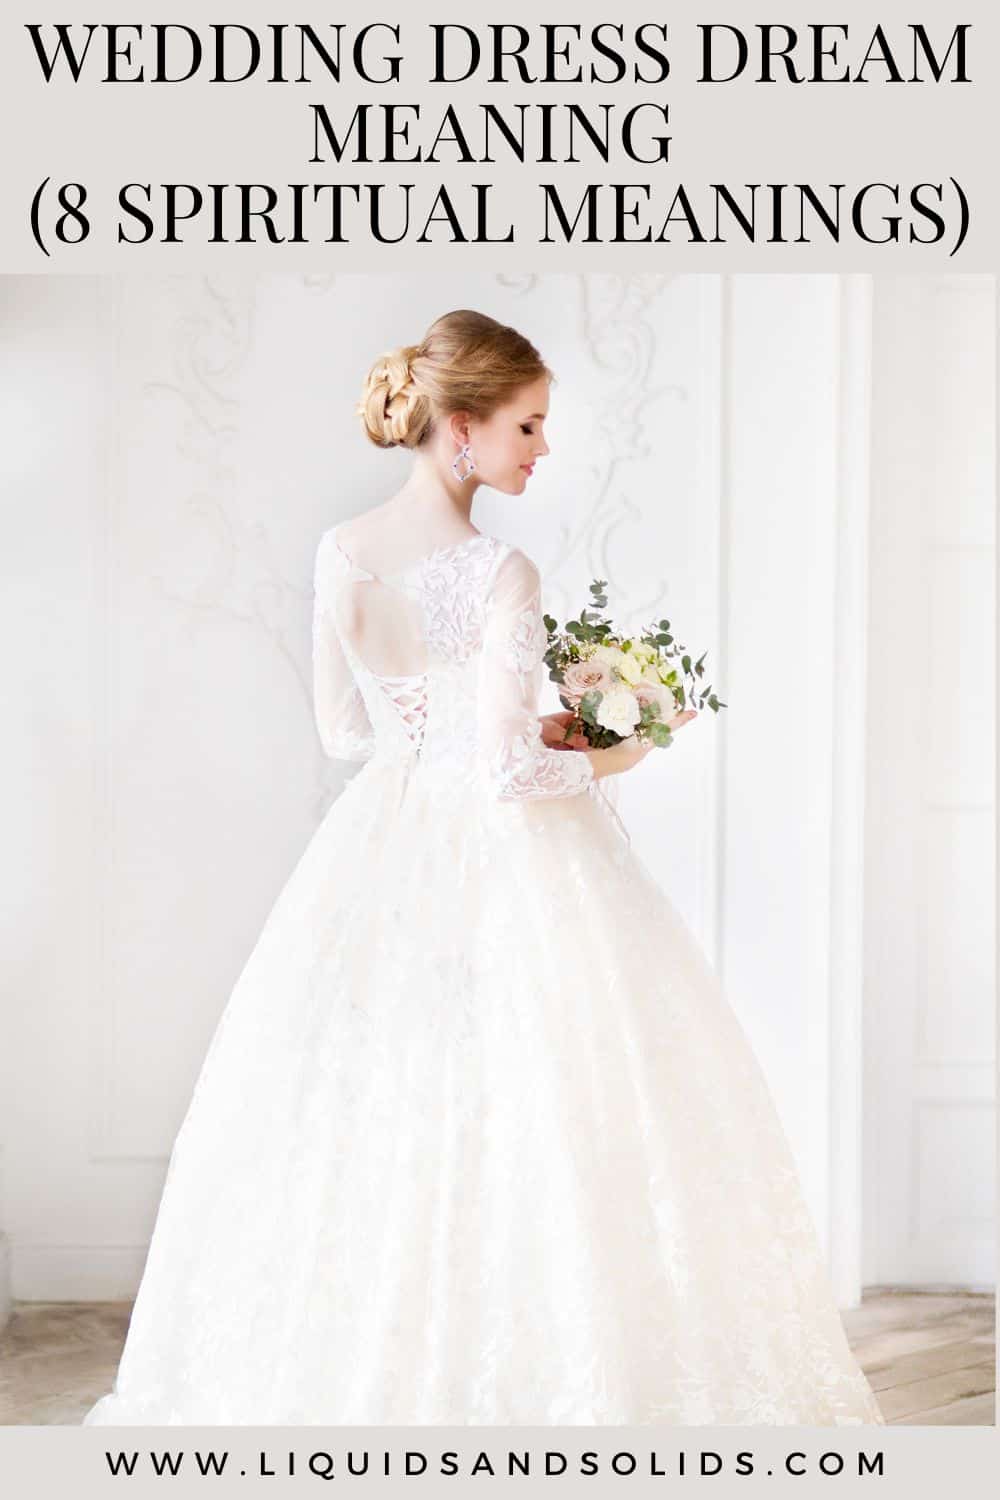 Wedding Dress Dream Meaning (8 Spiritual Meanings)